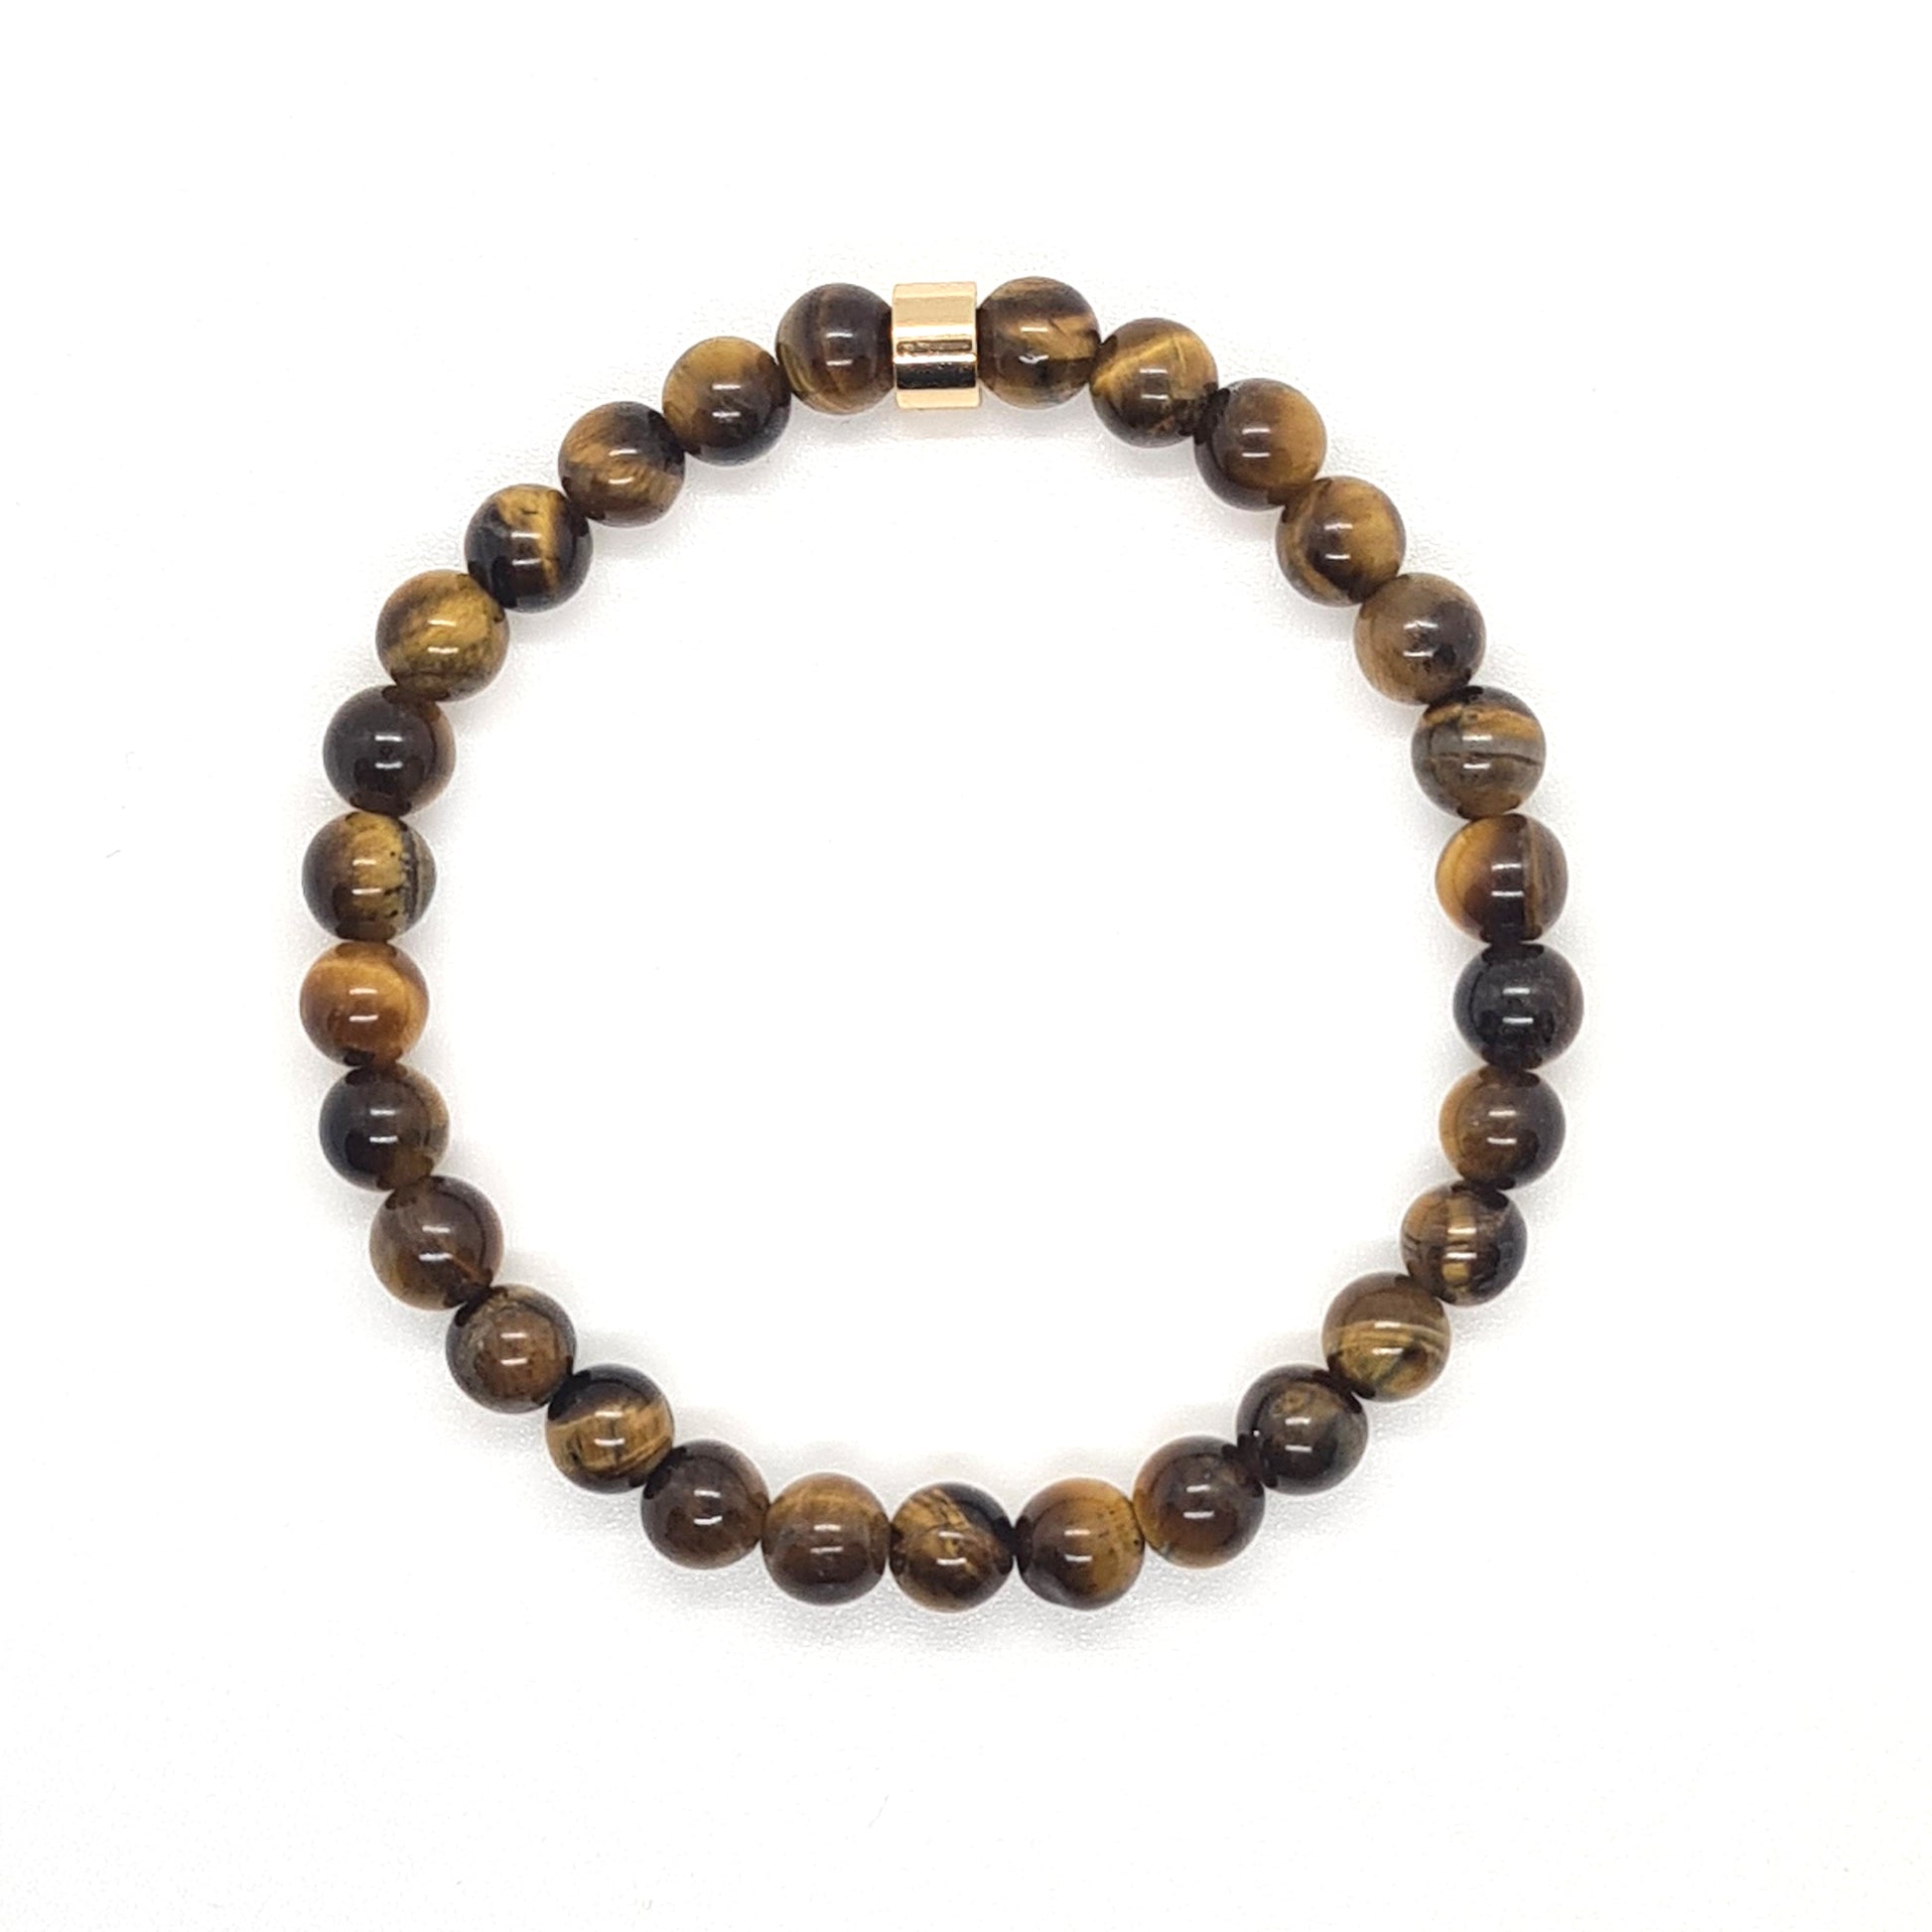 e gemstone bracelet in 6mm beads with gold accessory from above